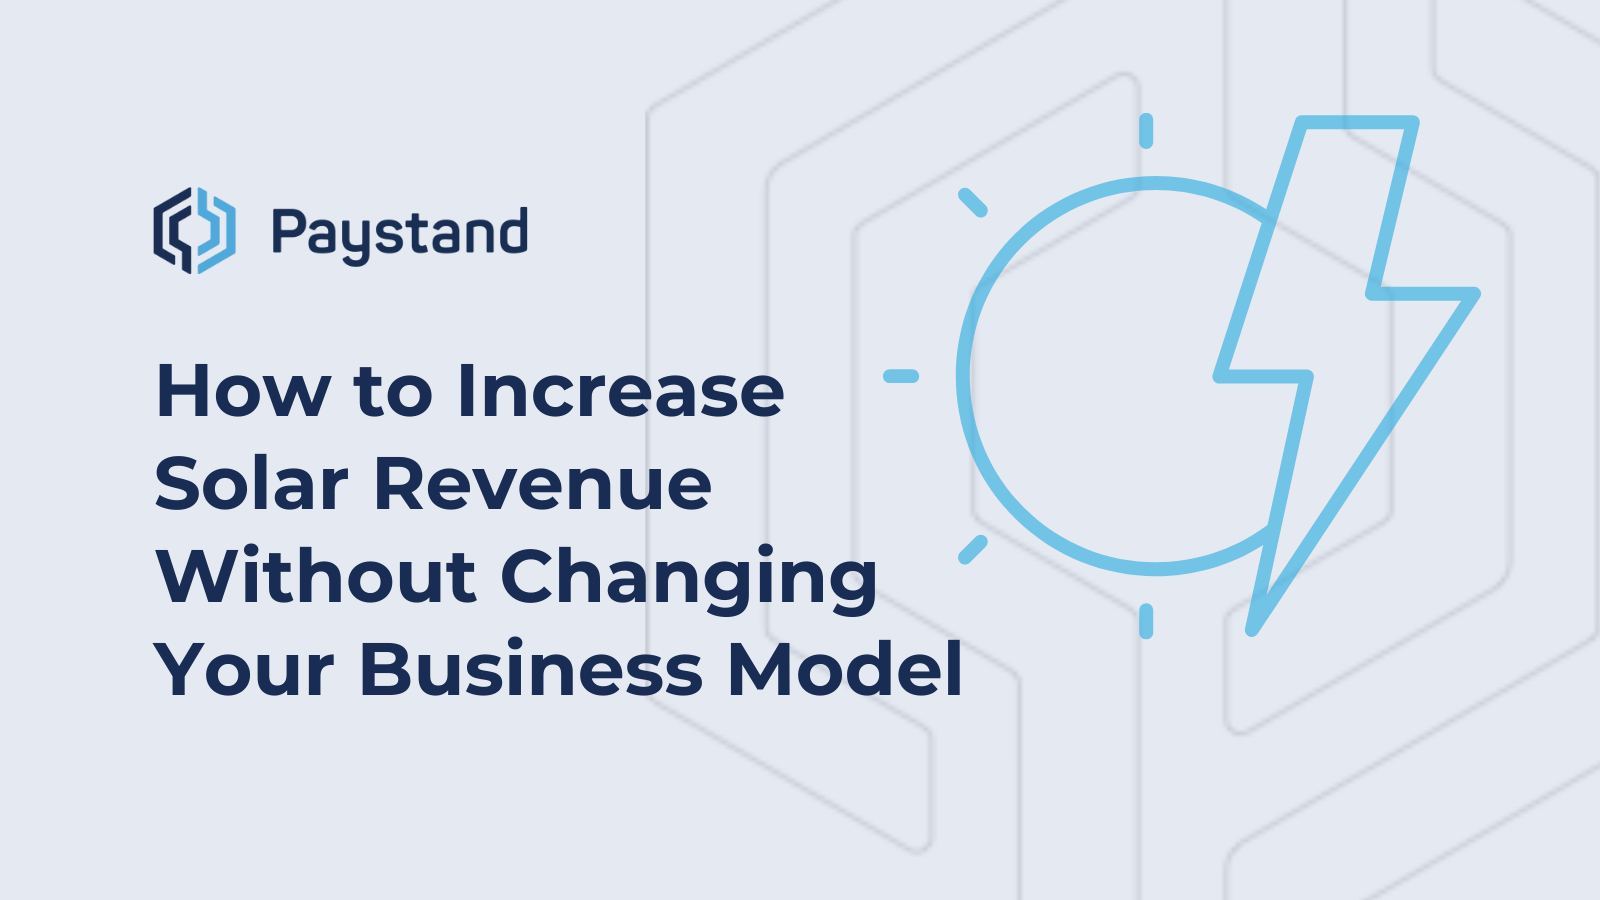 How to Increase Solar Revenue (Without Changing Your Business Model)